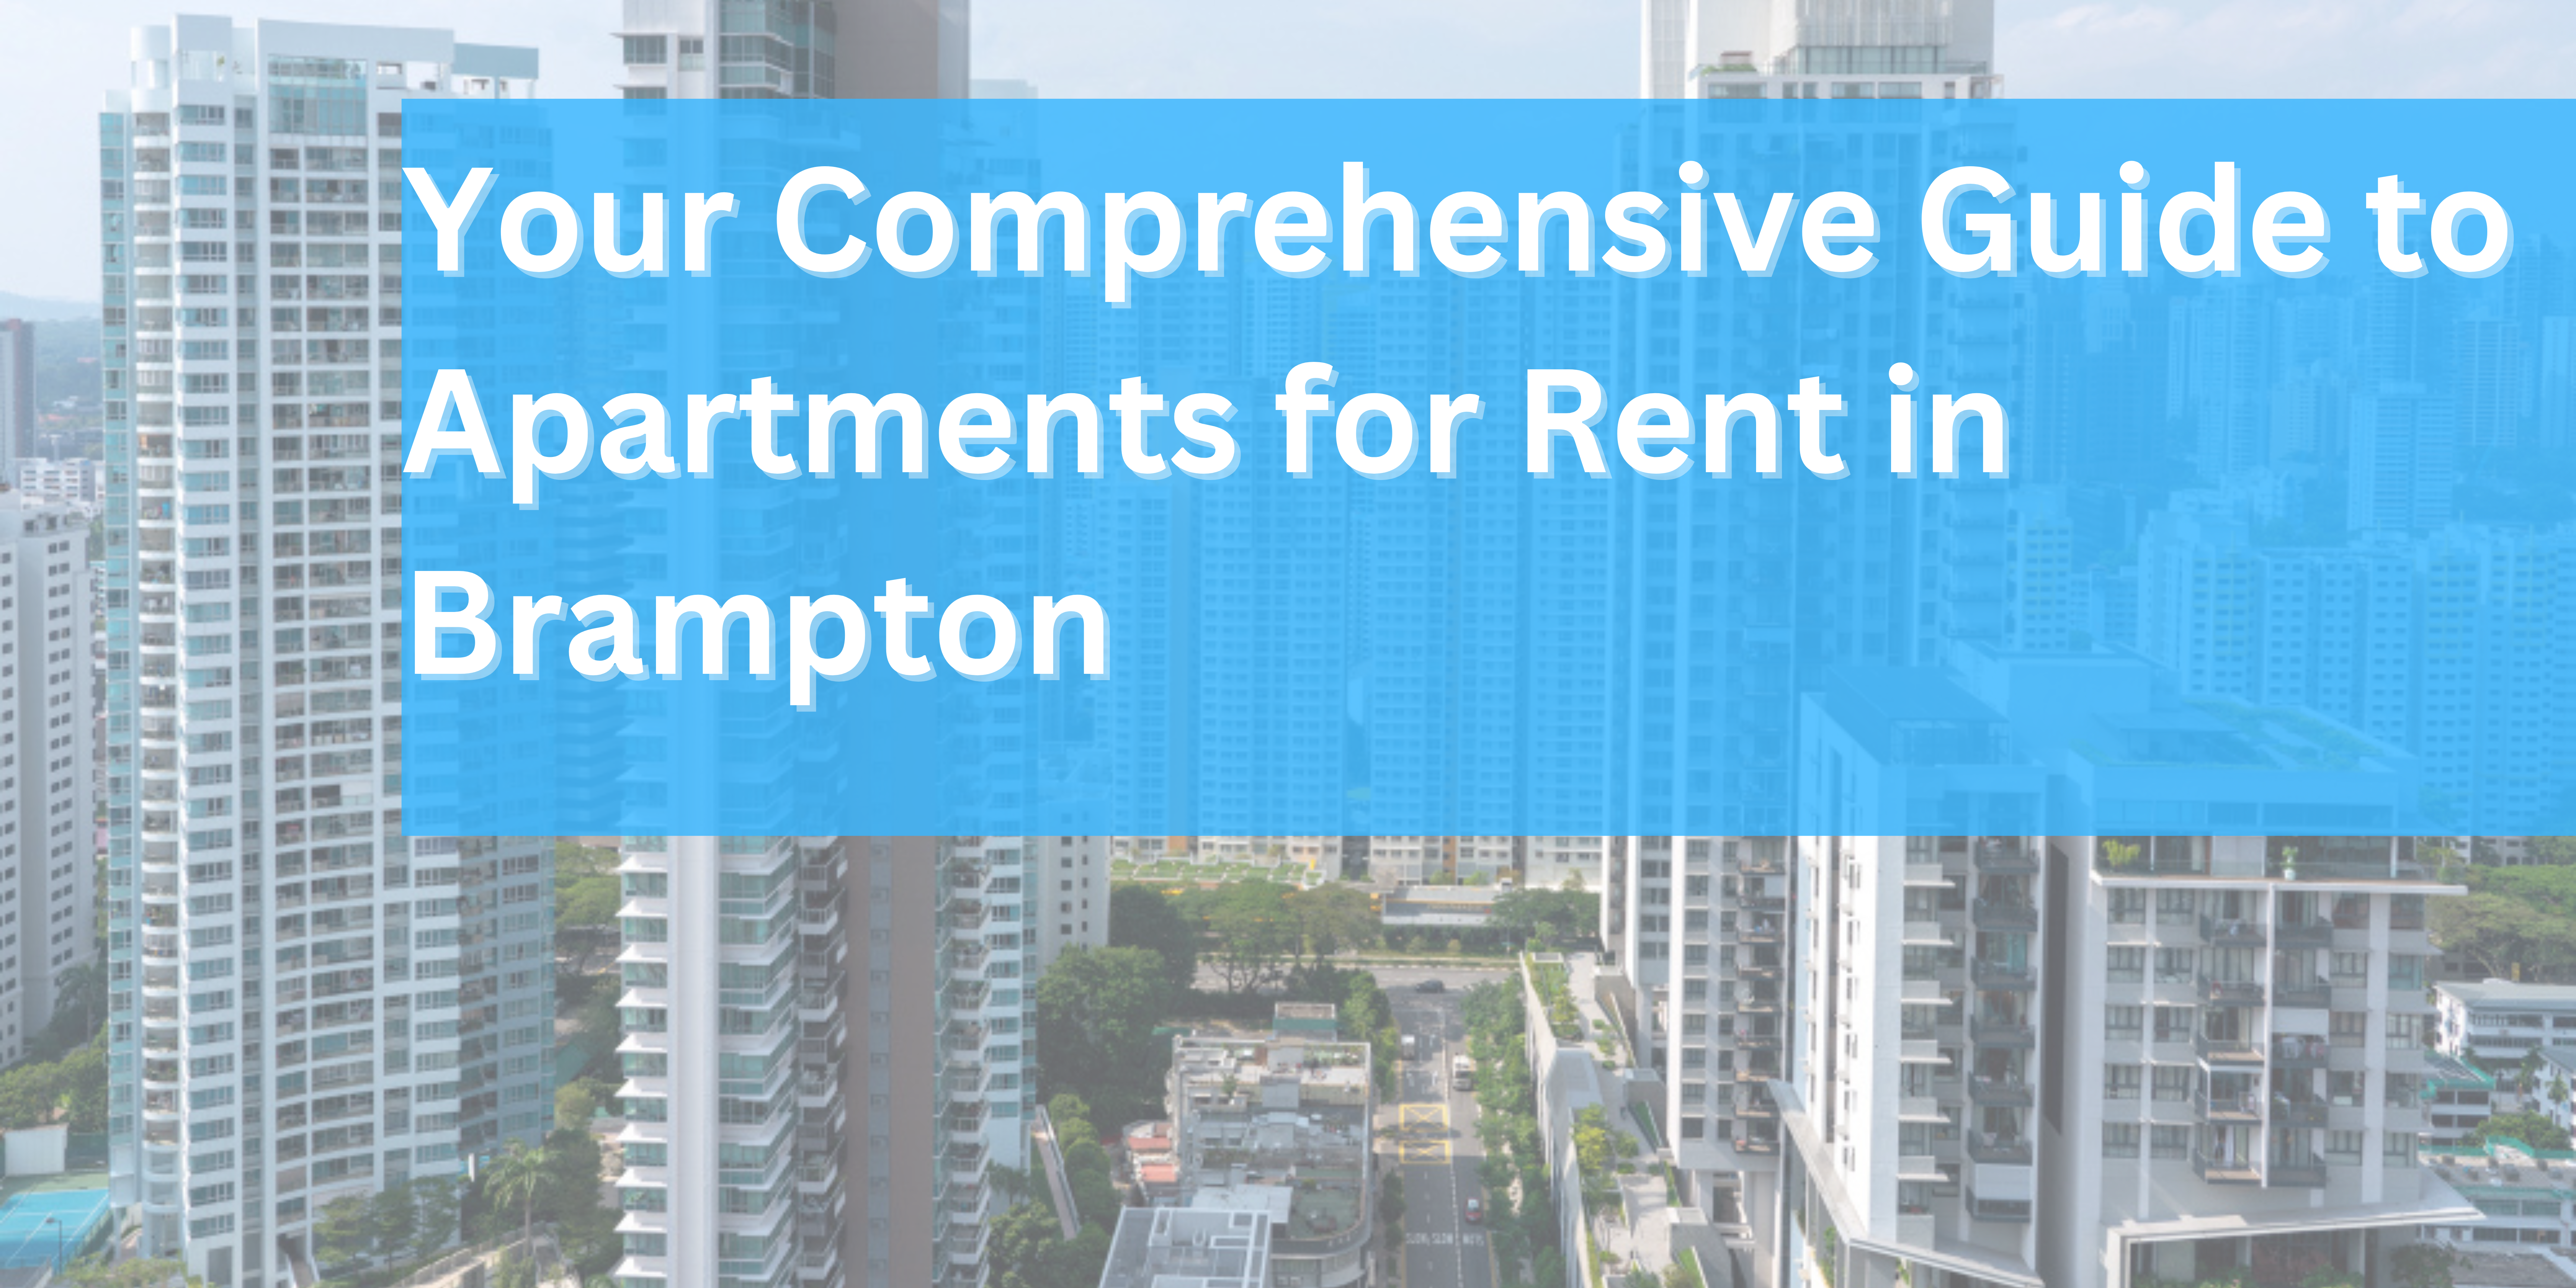 Apartments for Rent in Brampton : Comprehensive Guide